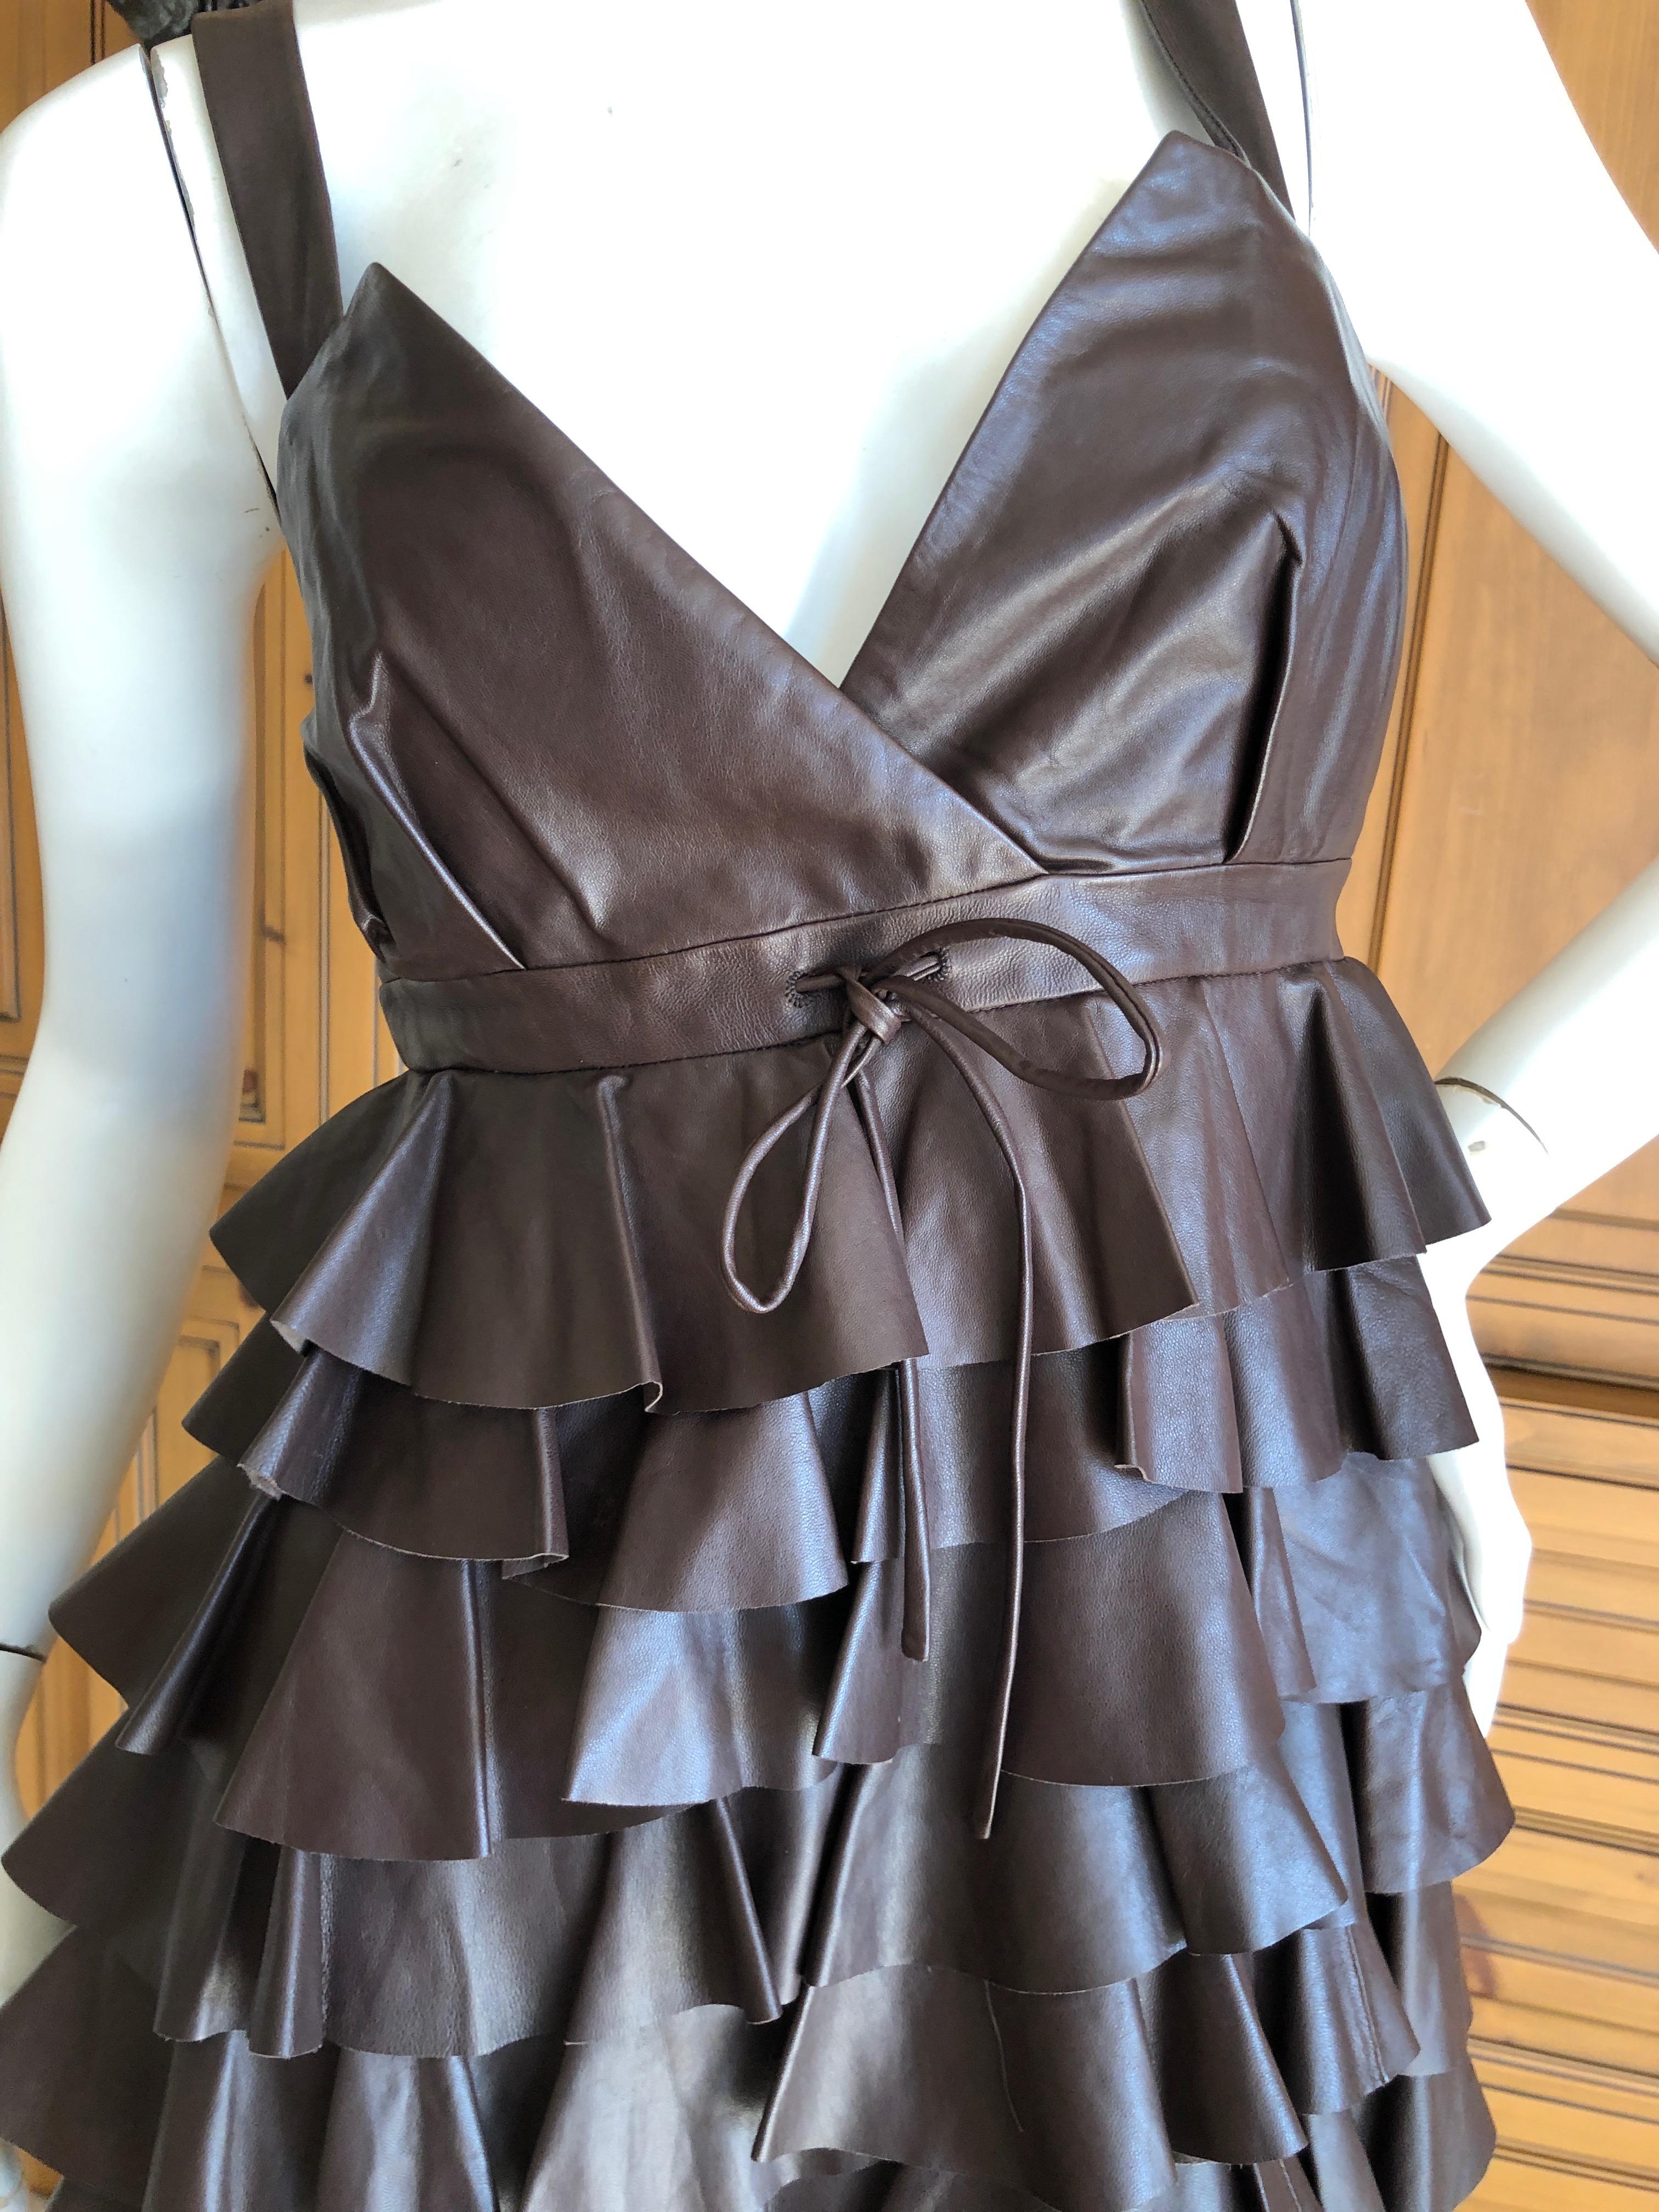 Christian Dior by John Galliano Fall 2010 Lamb Skin Leather Ruffled Mini Dress In Excellent Condition For Sale In Cloverdale, CA